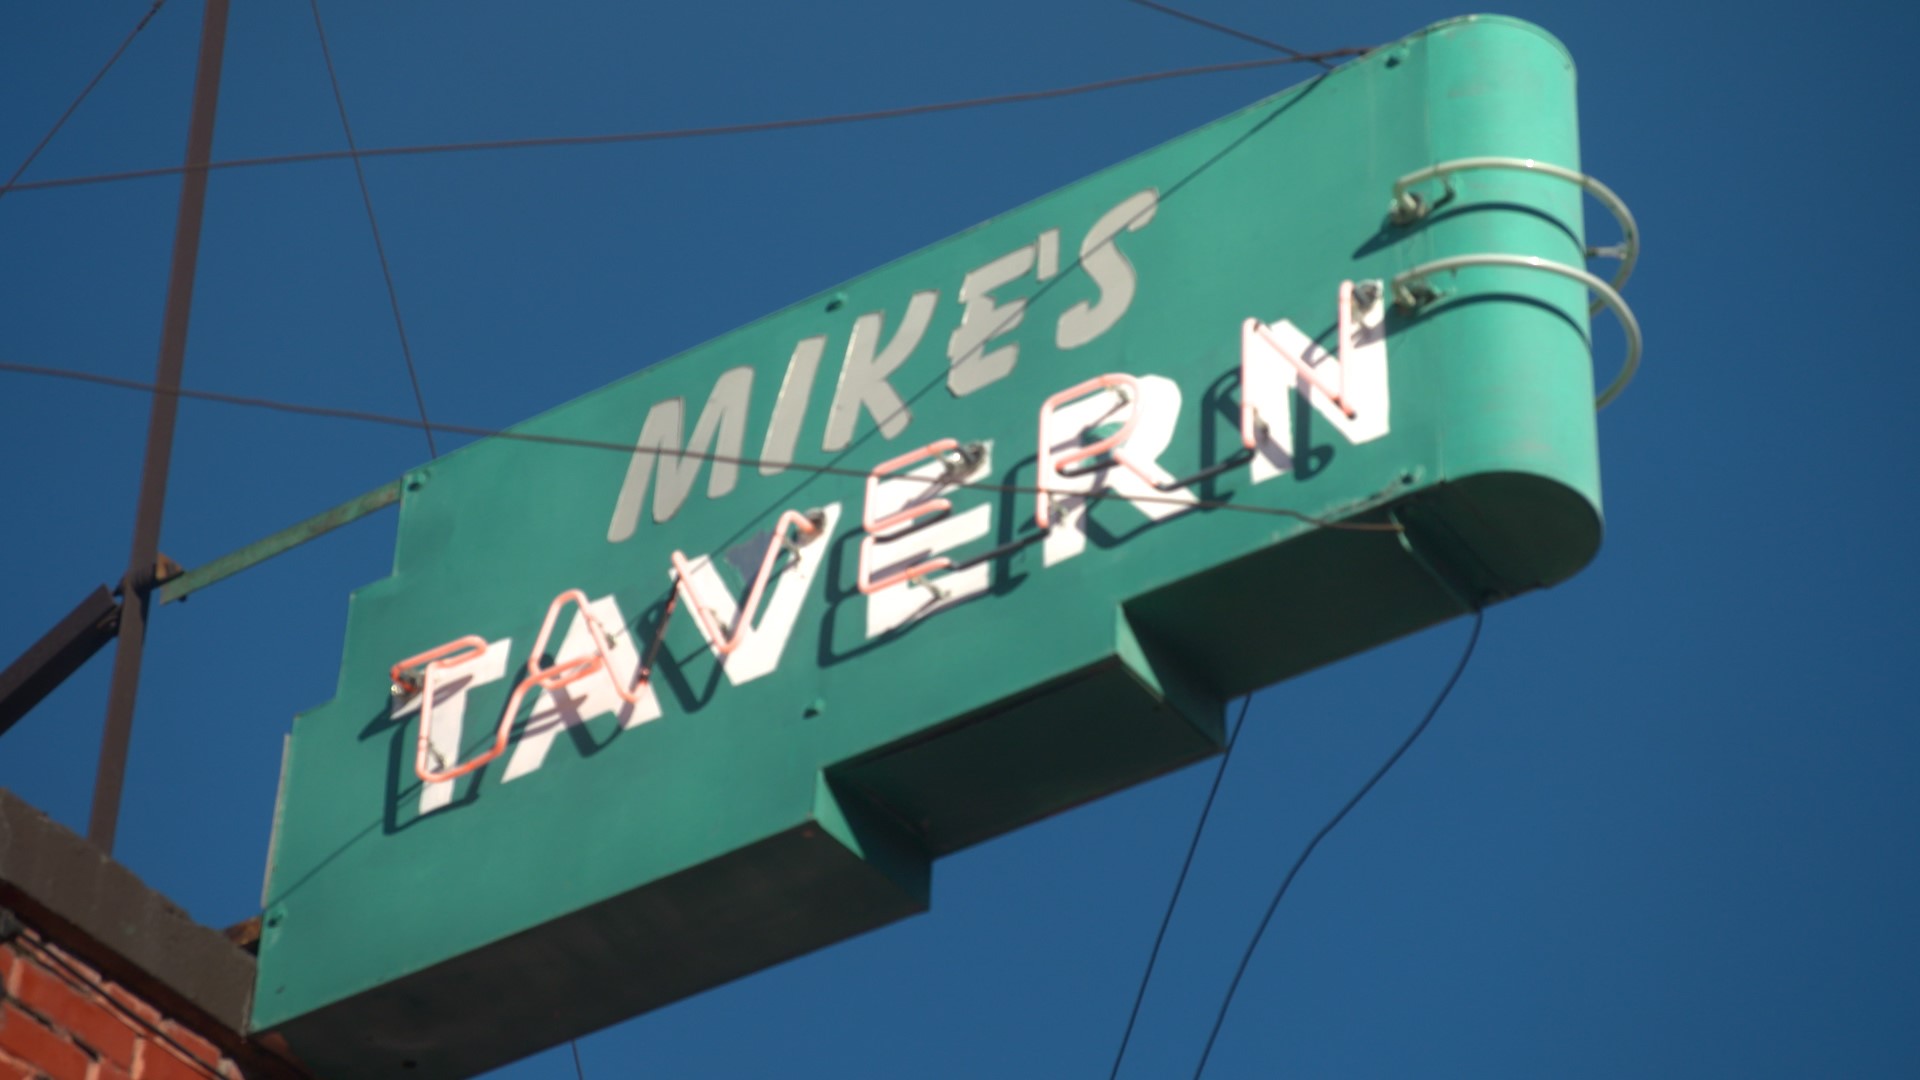 A downtown Cle Elum classic tavern for decades - Five Star Dive Bars. #k5evening